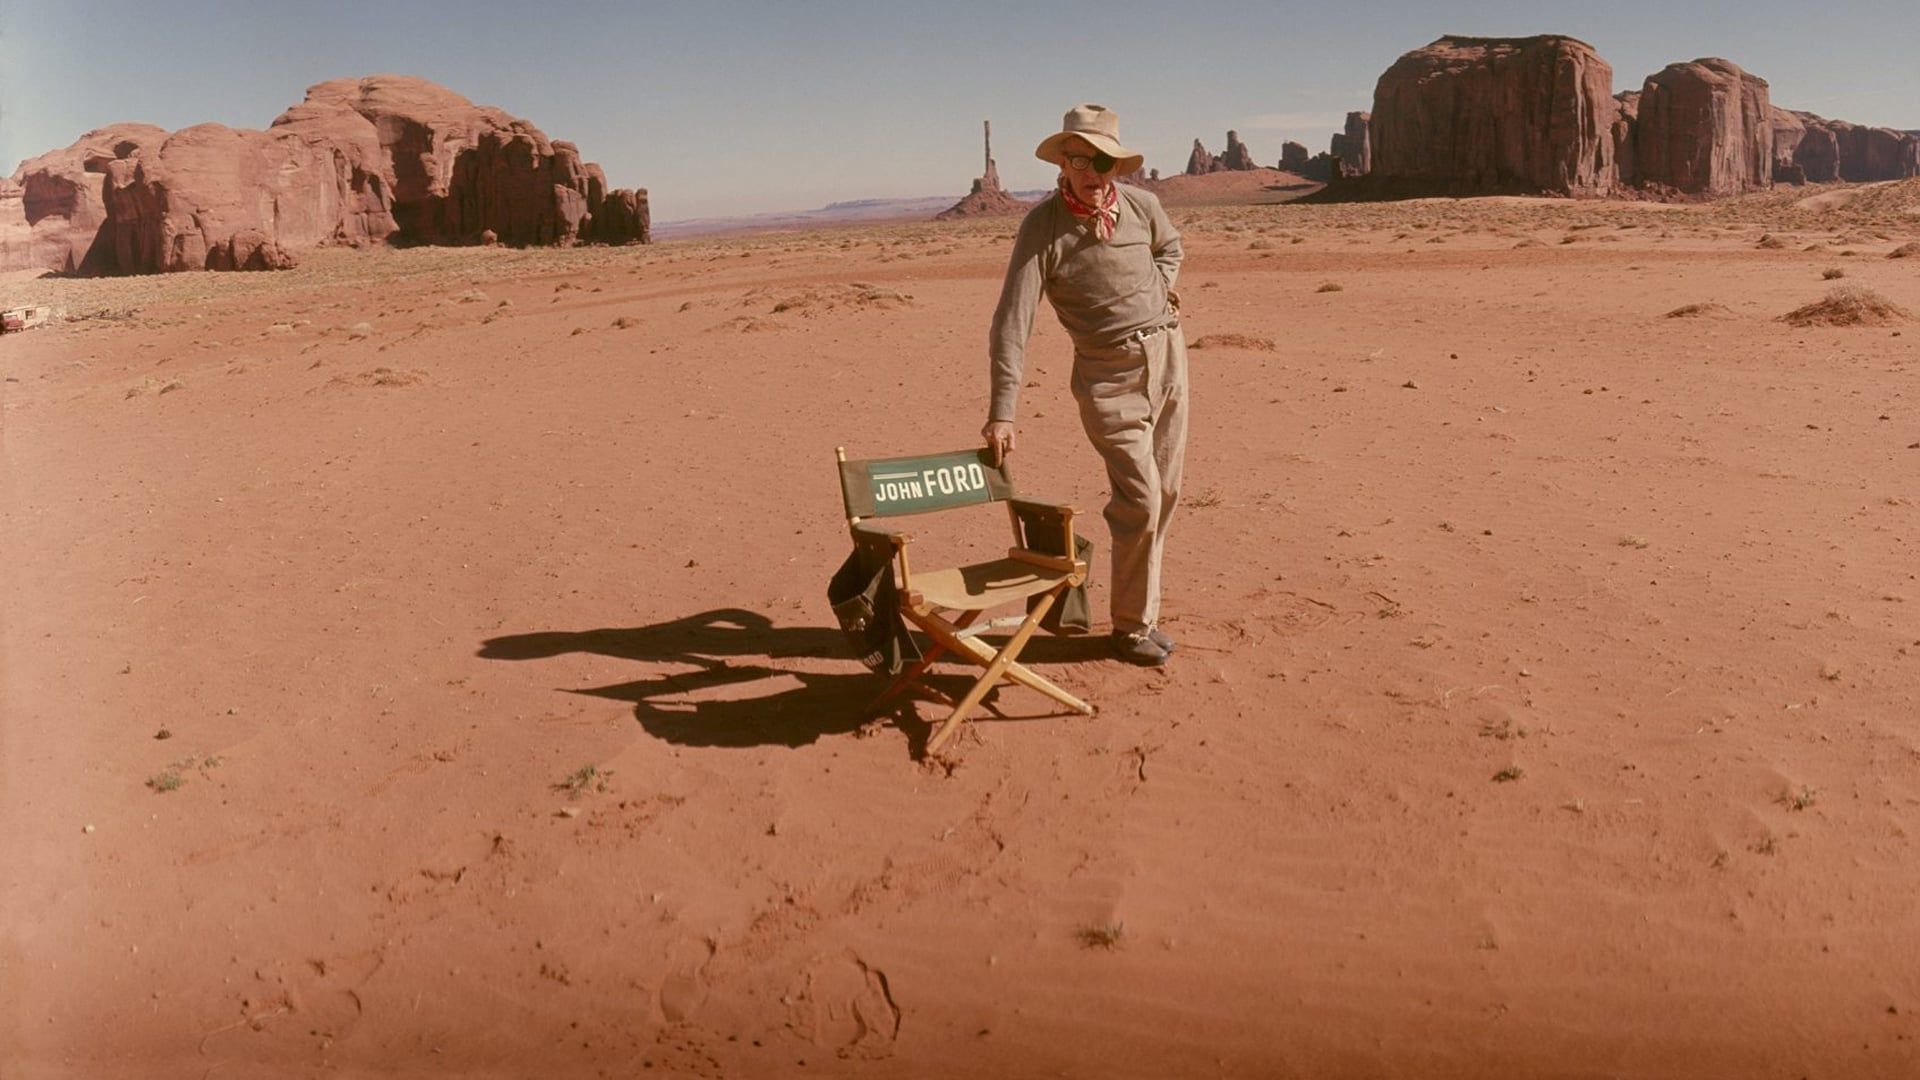 Directed by John Ford background